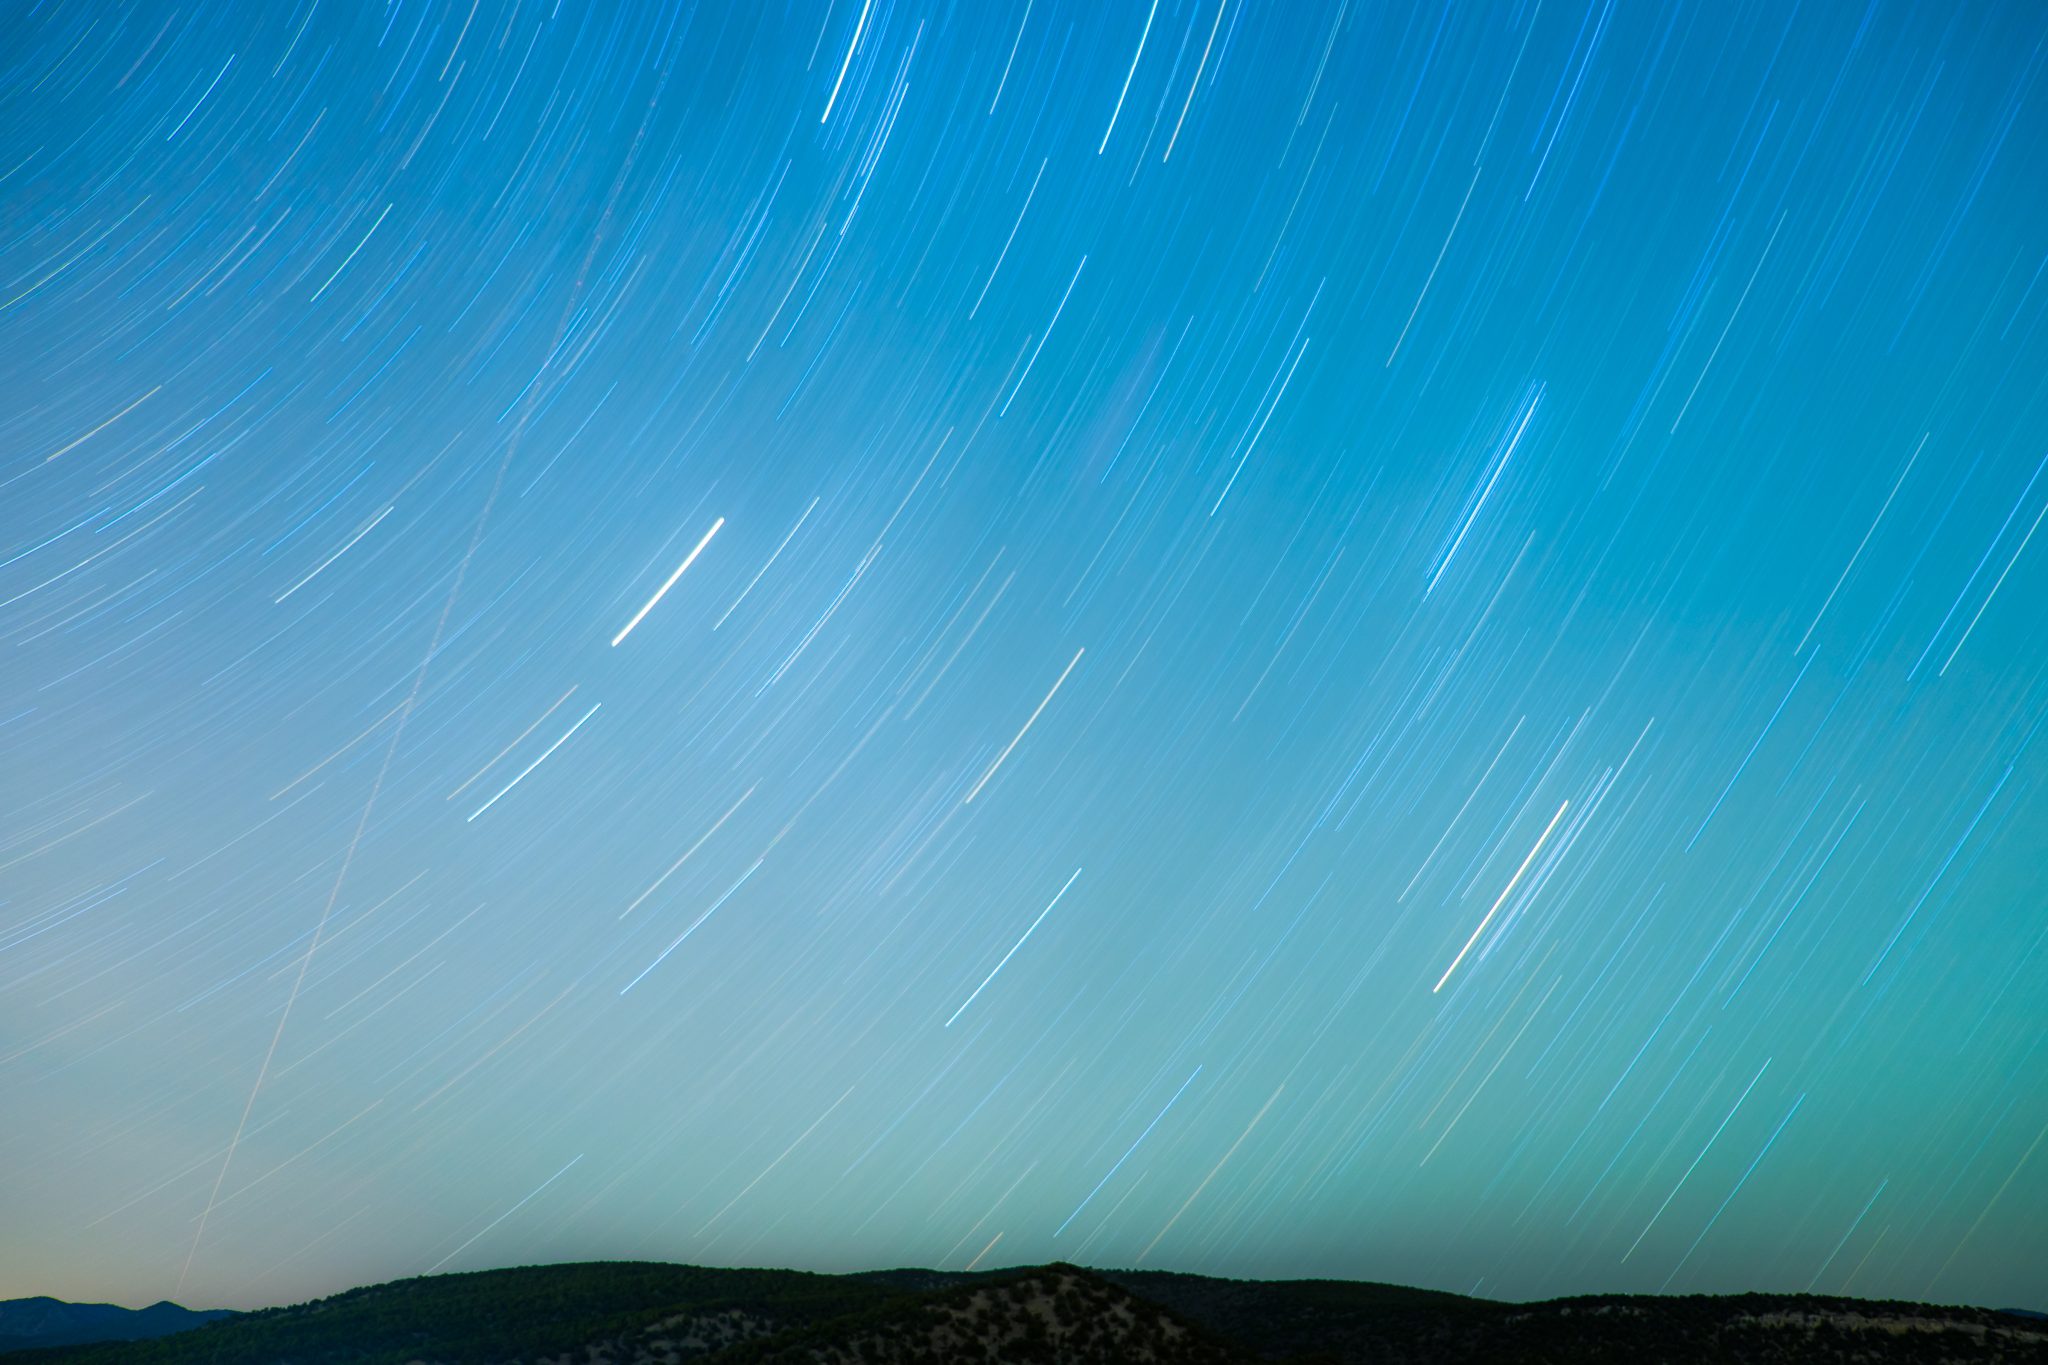 An hour long exposure of some star trails above Utah, USA.